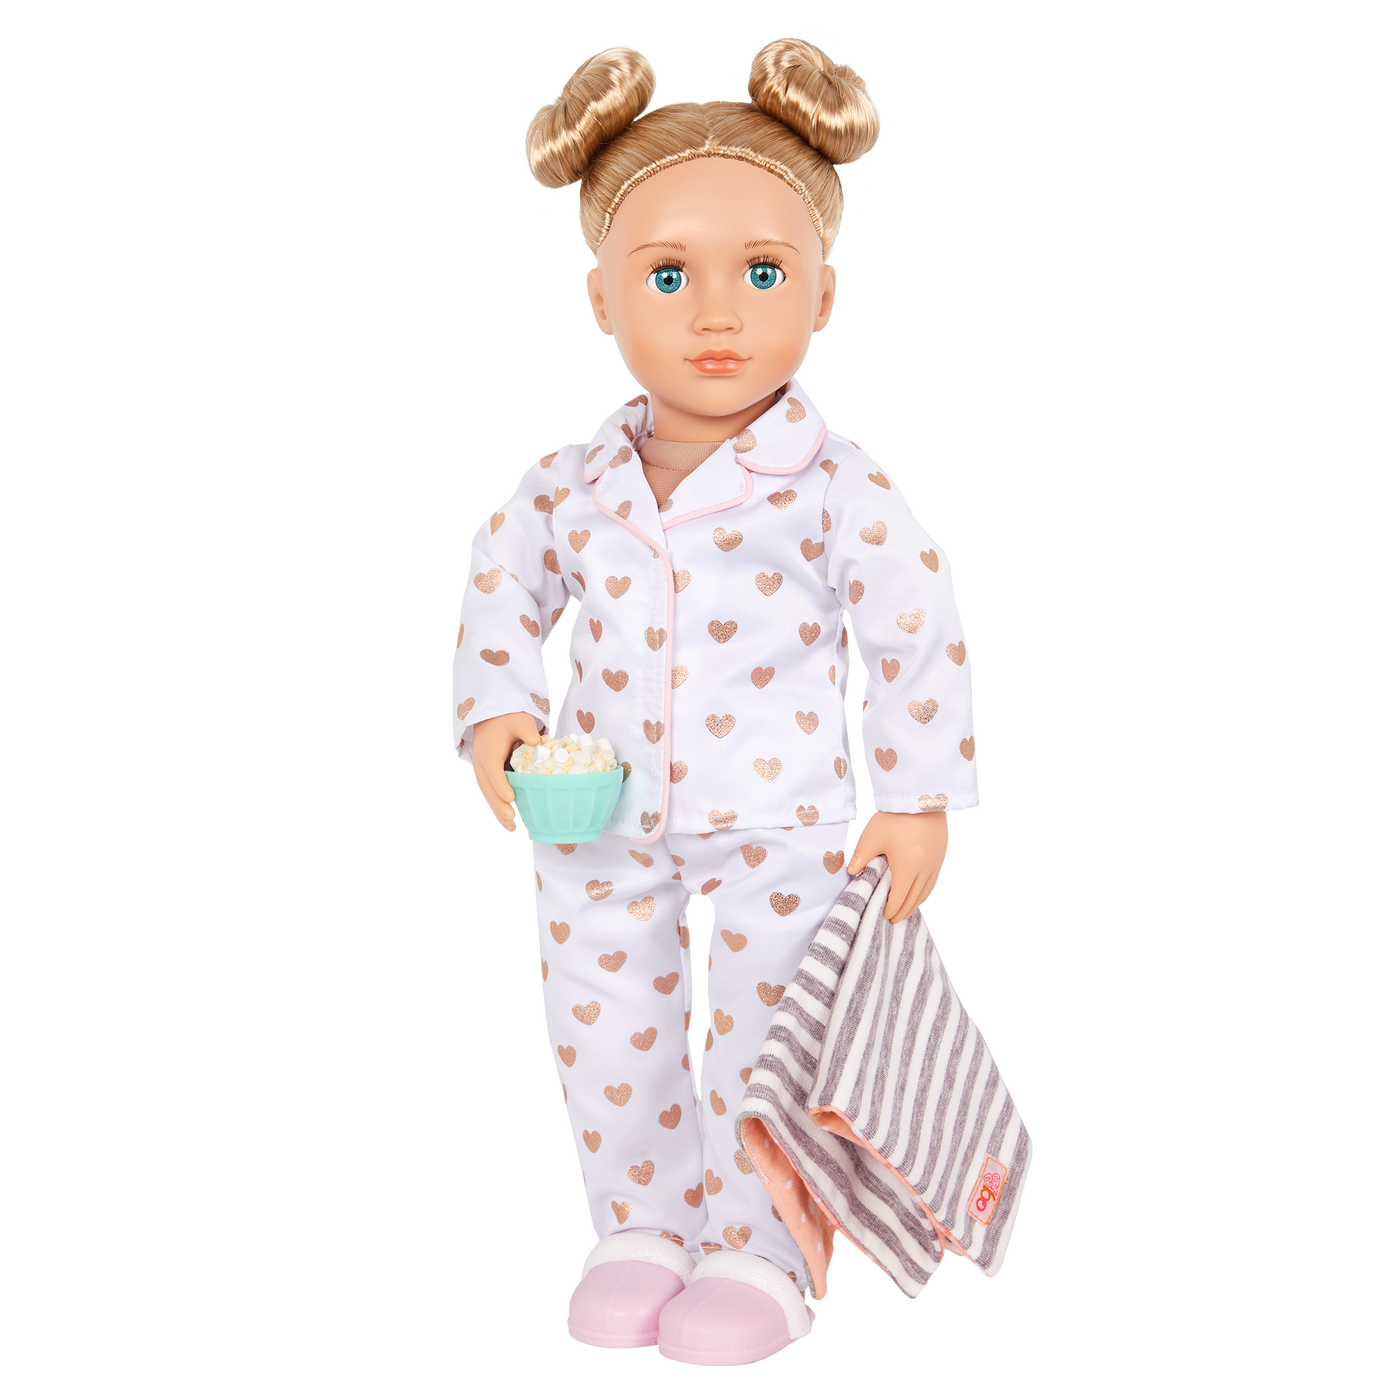 18-inch doll with slumber party playset